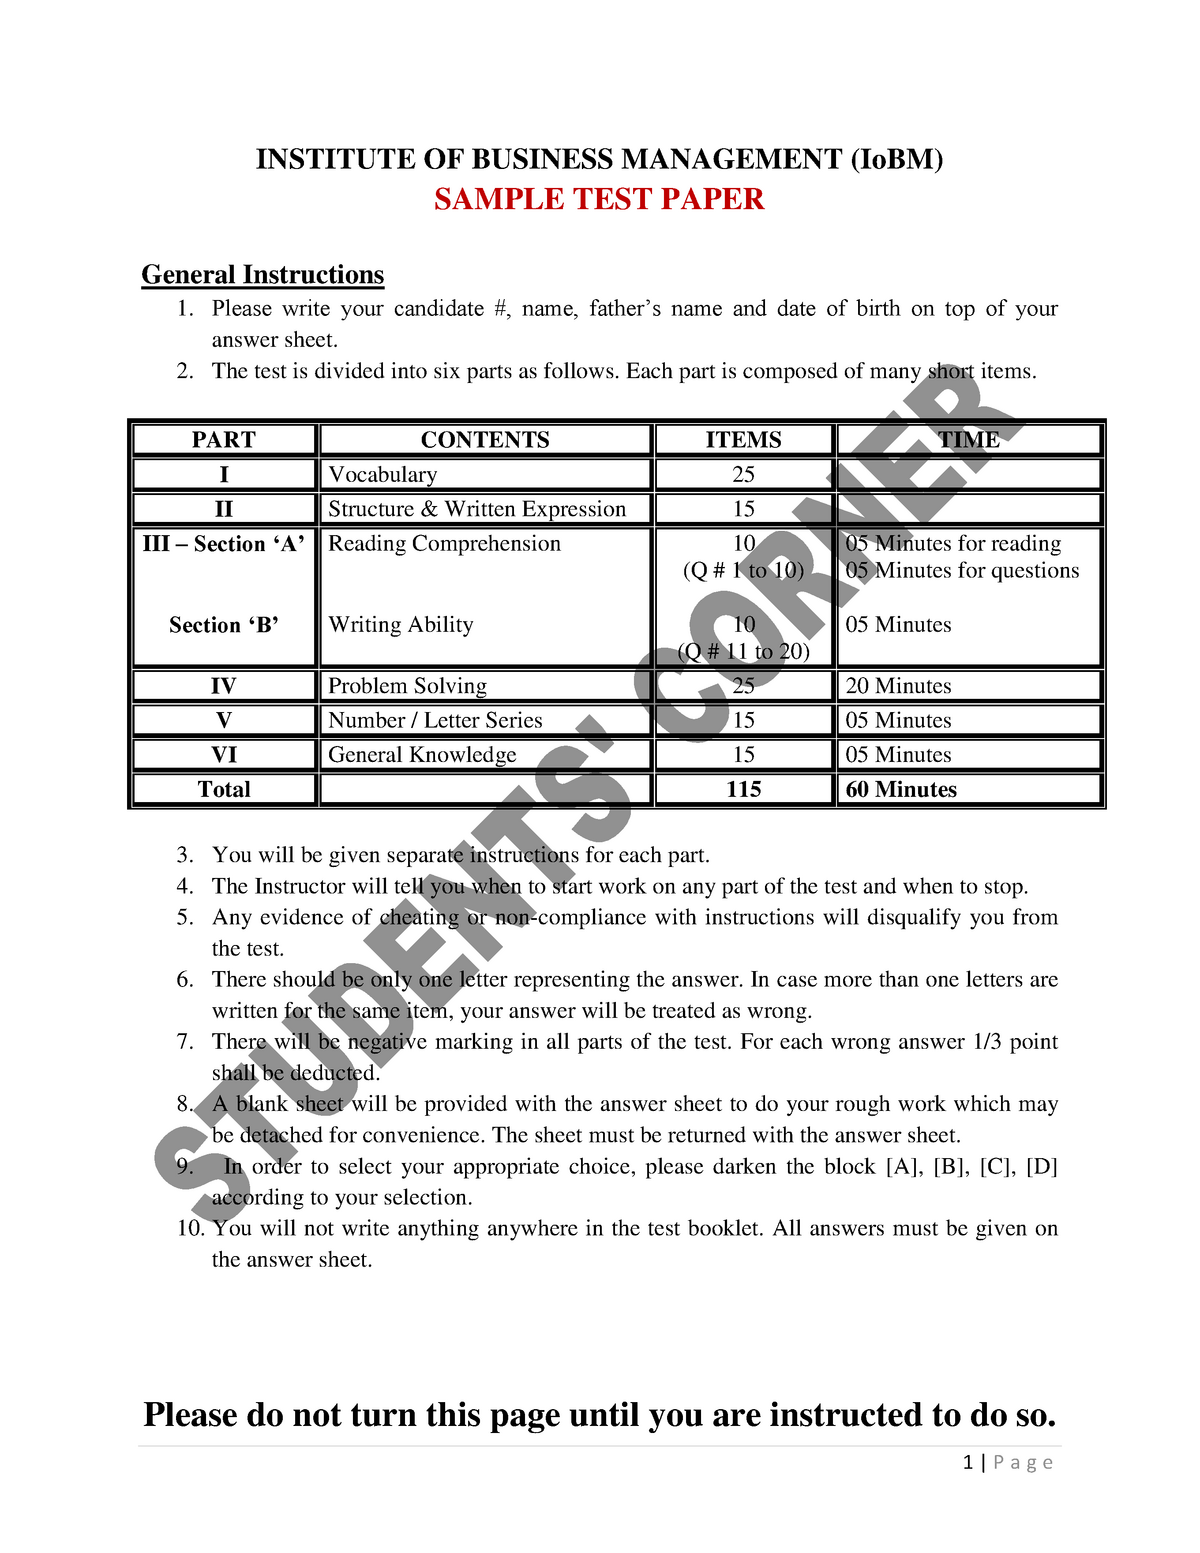 cbm-model-test-papers-institute-of-business-management-iobm-sample-test-paper-general